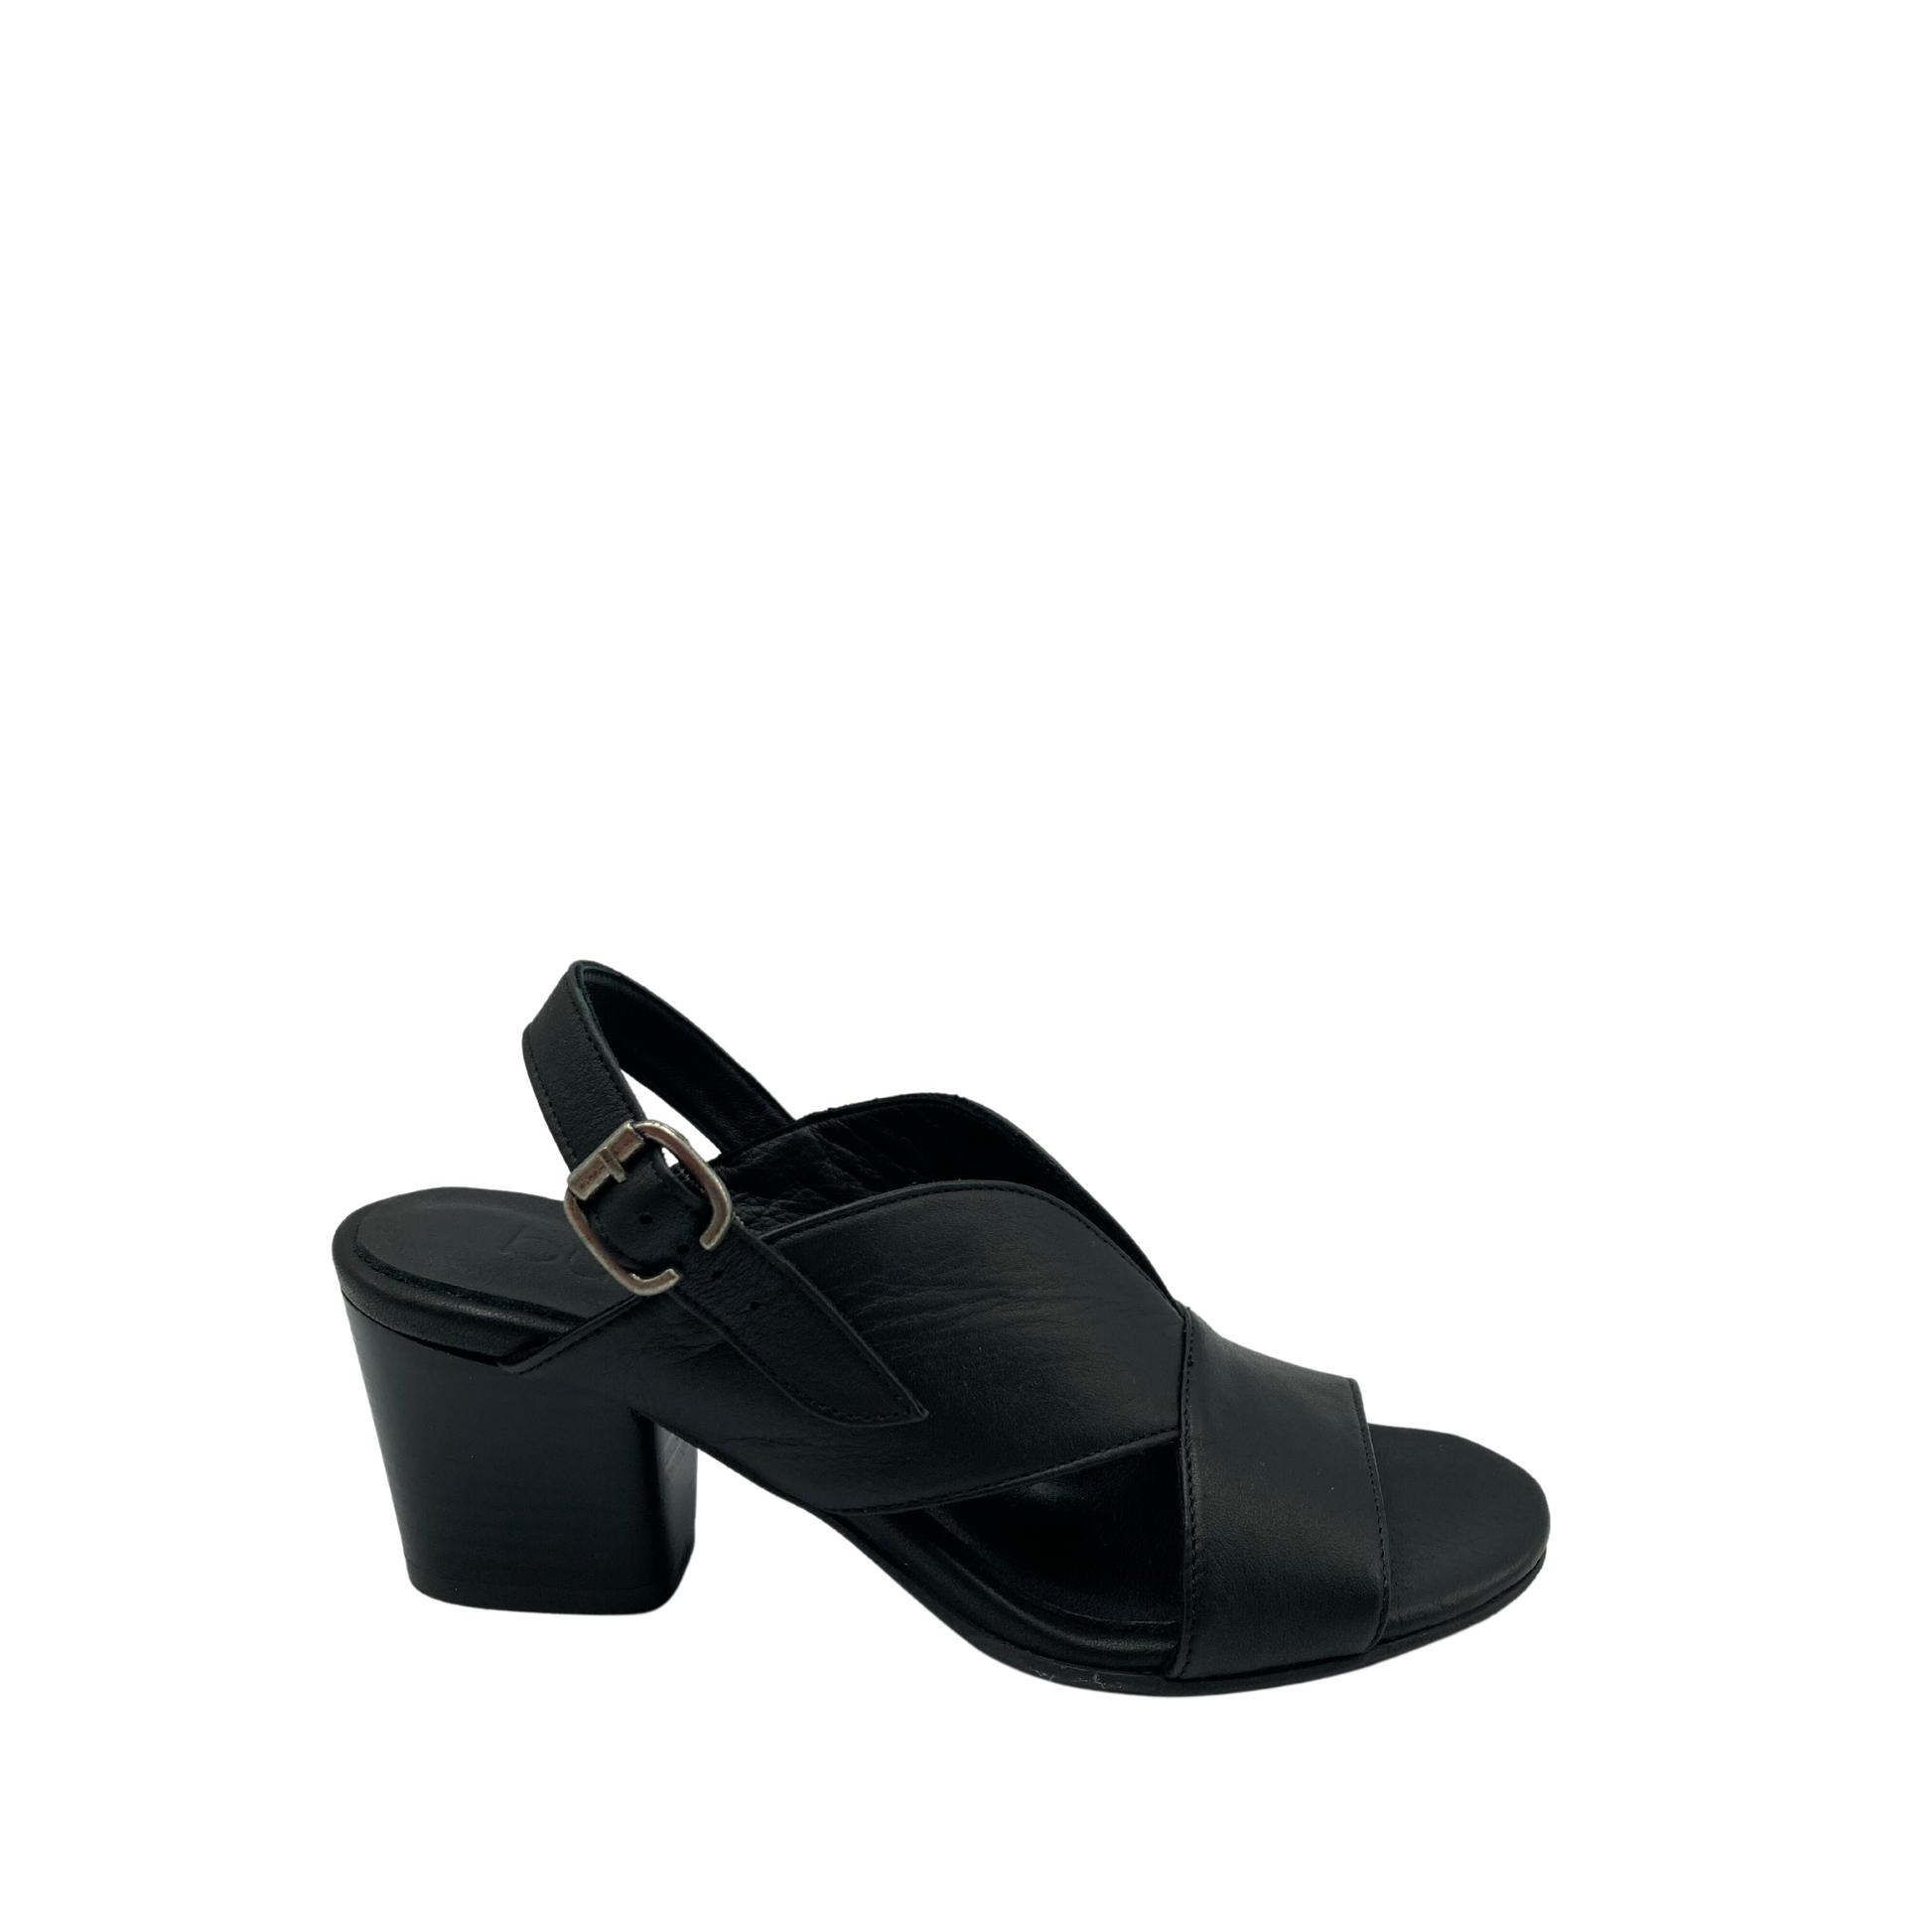 Outside view of black sandal with open toe and block heel